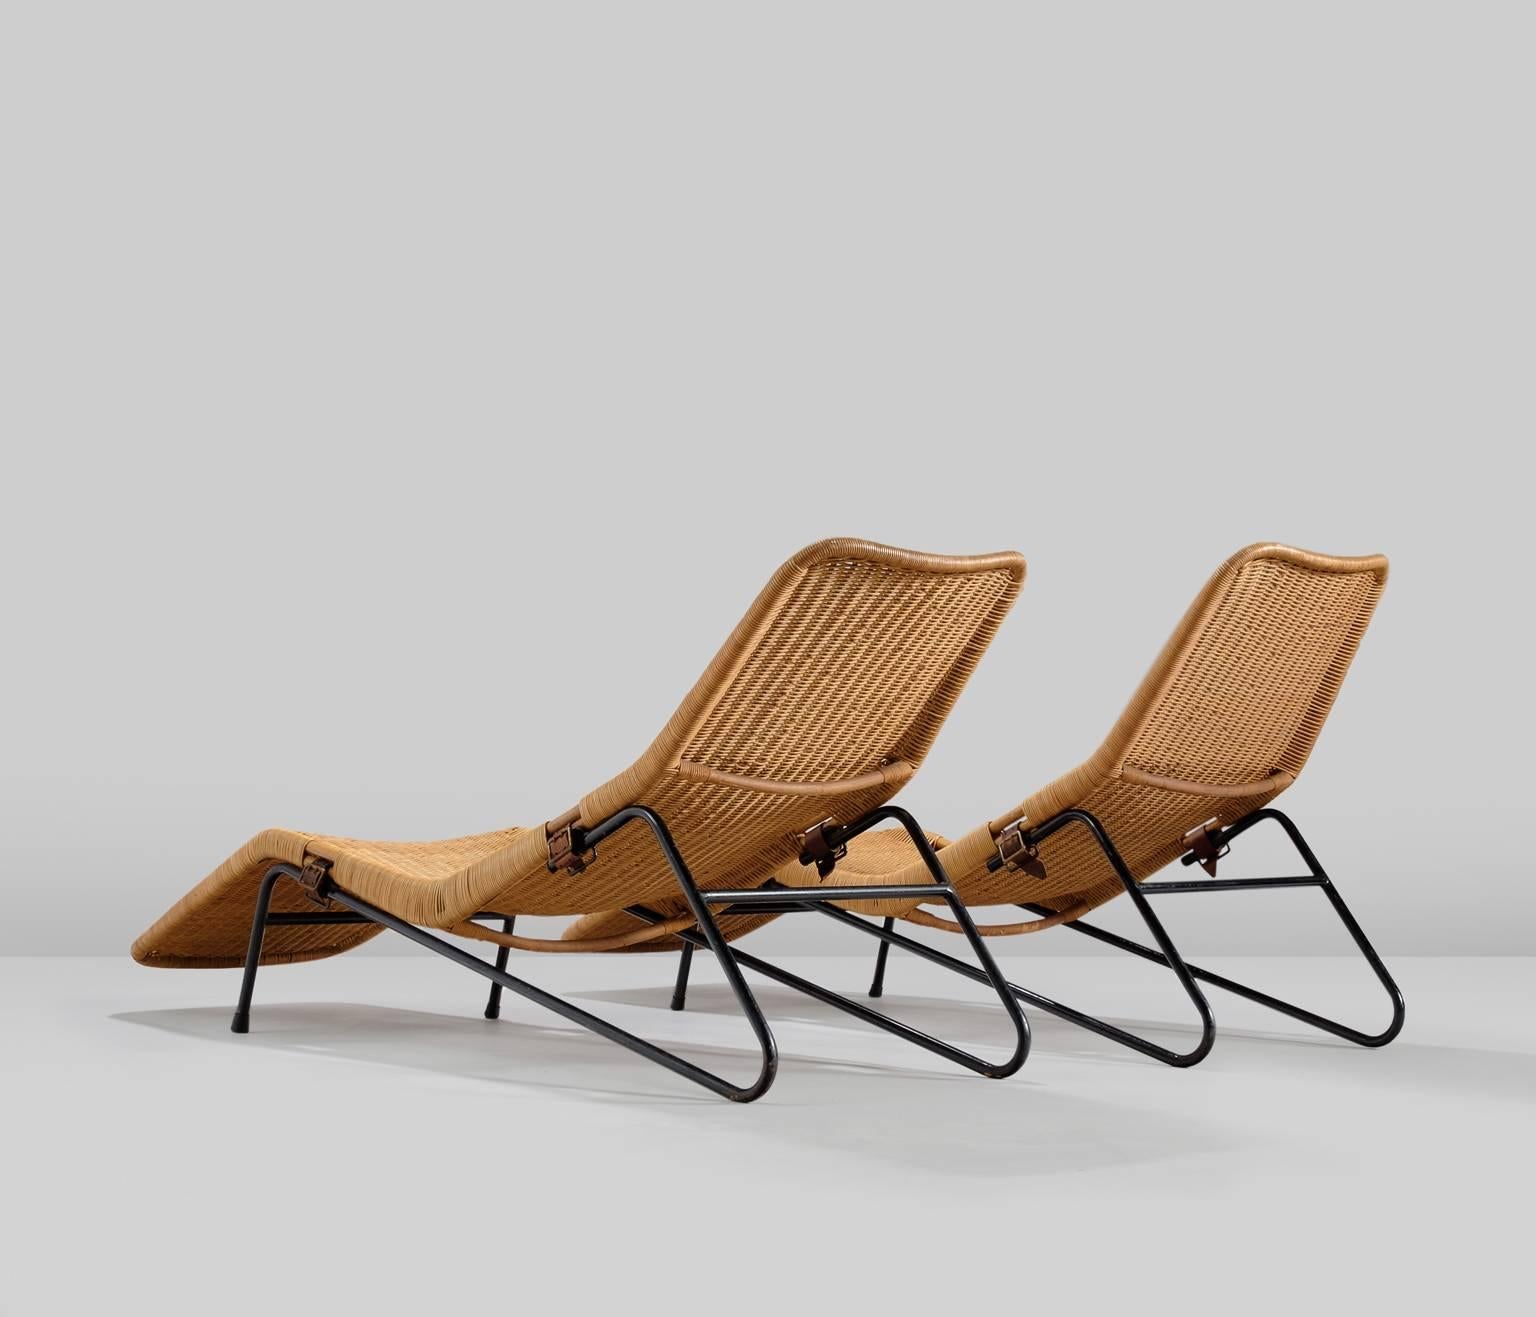 European Set of Two Chaise Lounges in Cane